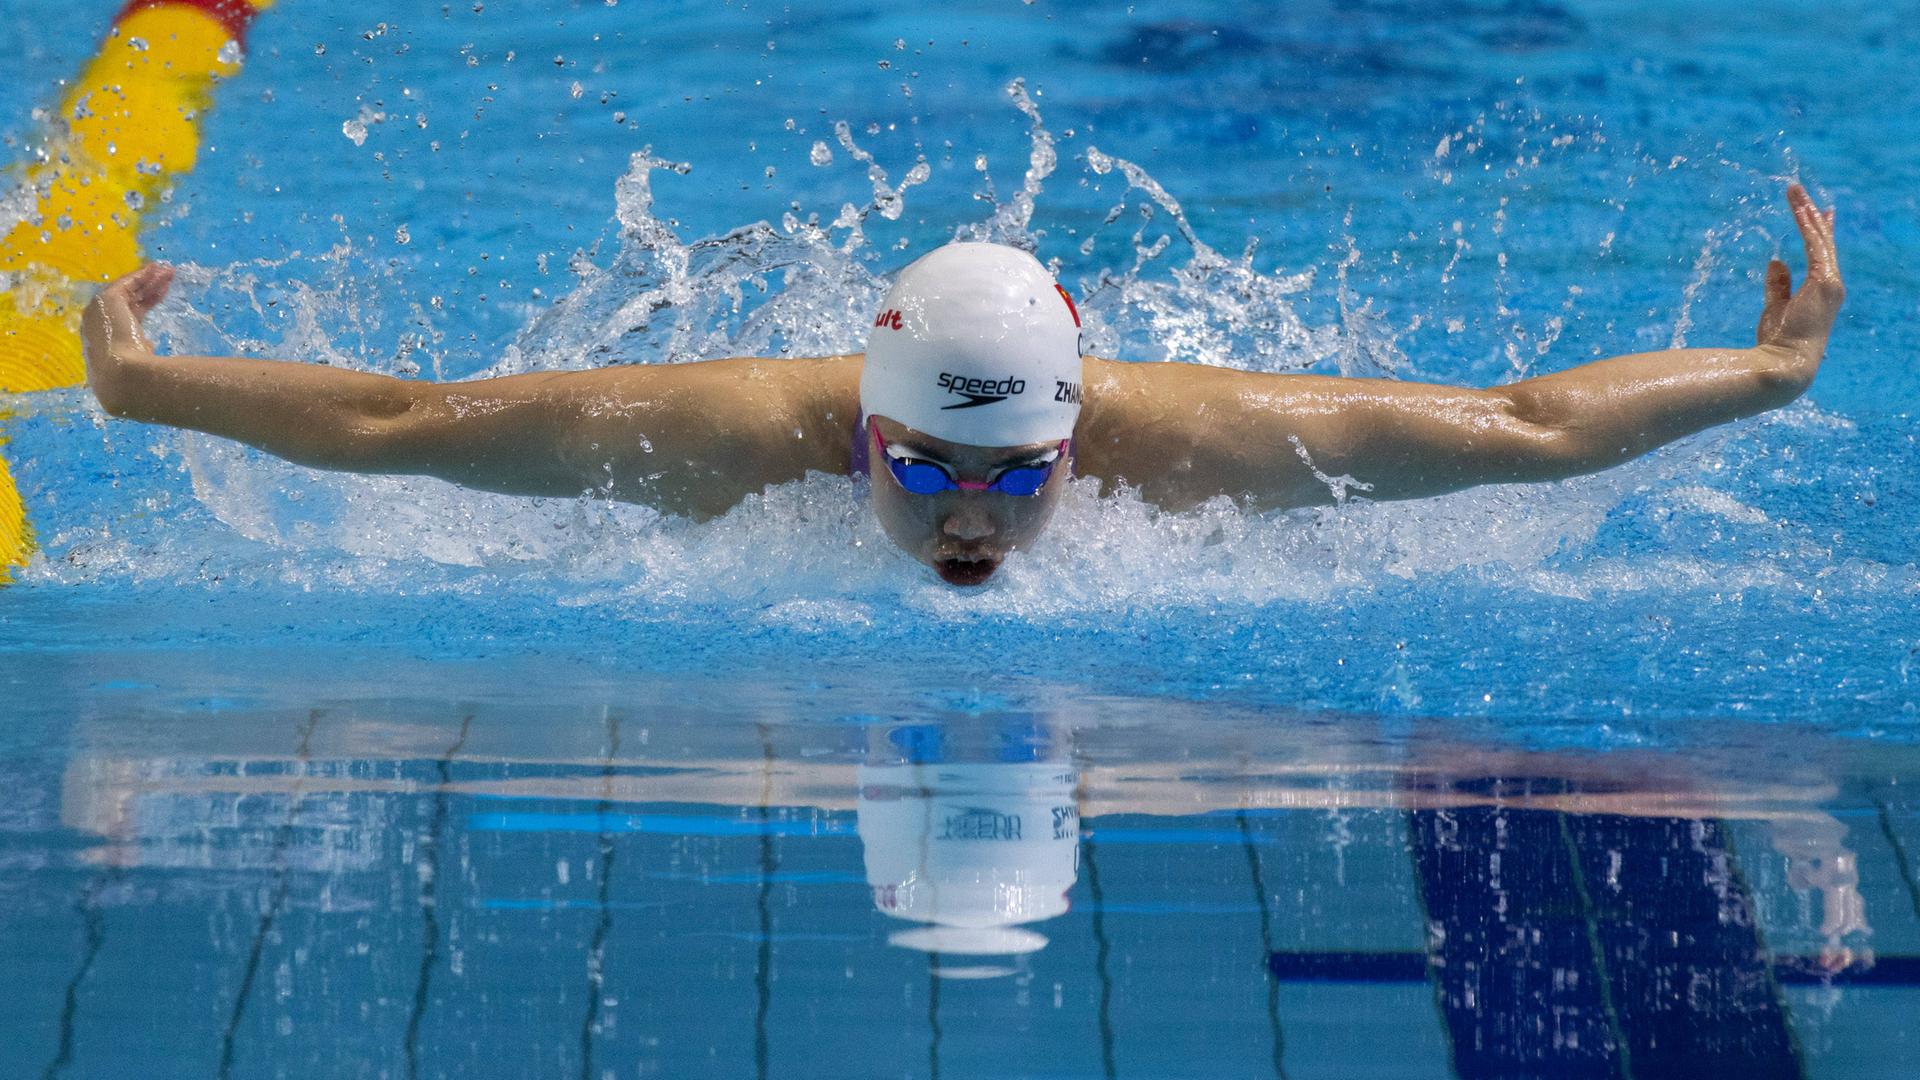 Doping allegations against Chinese swimmers